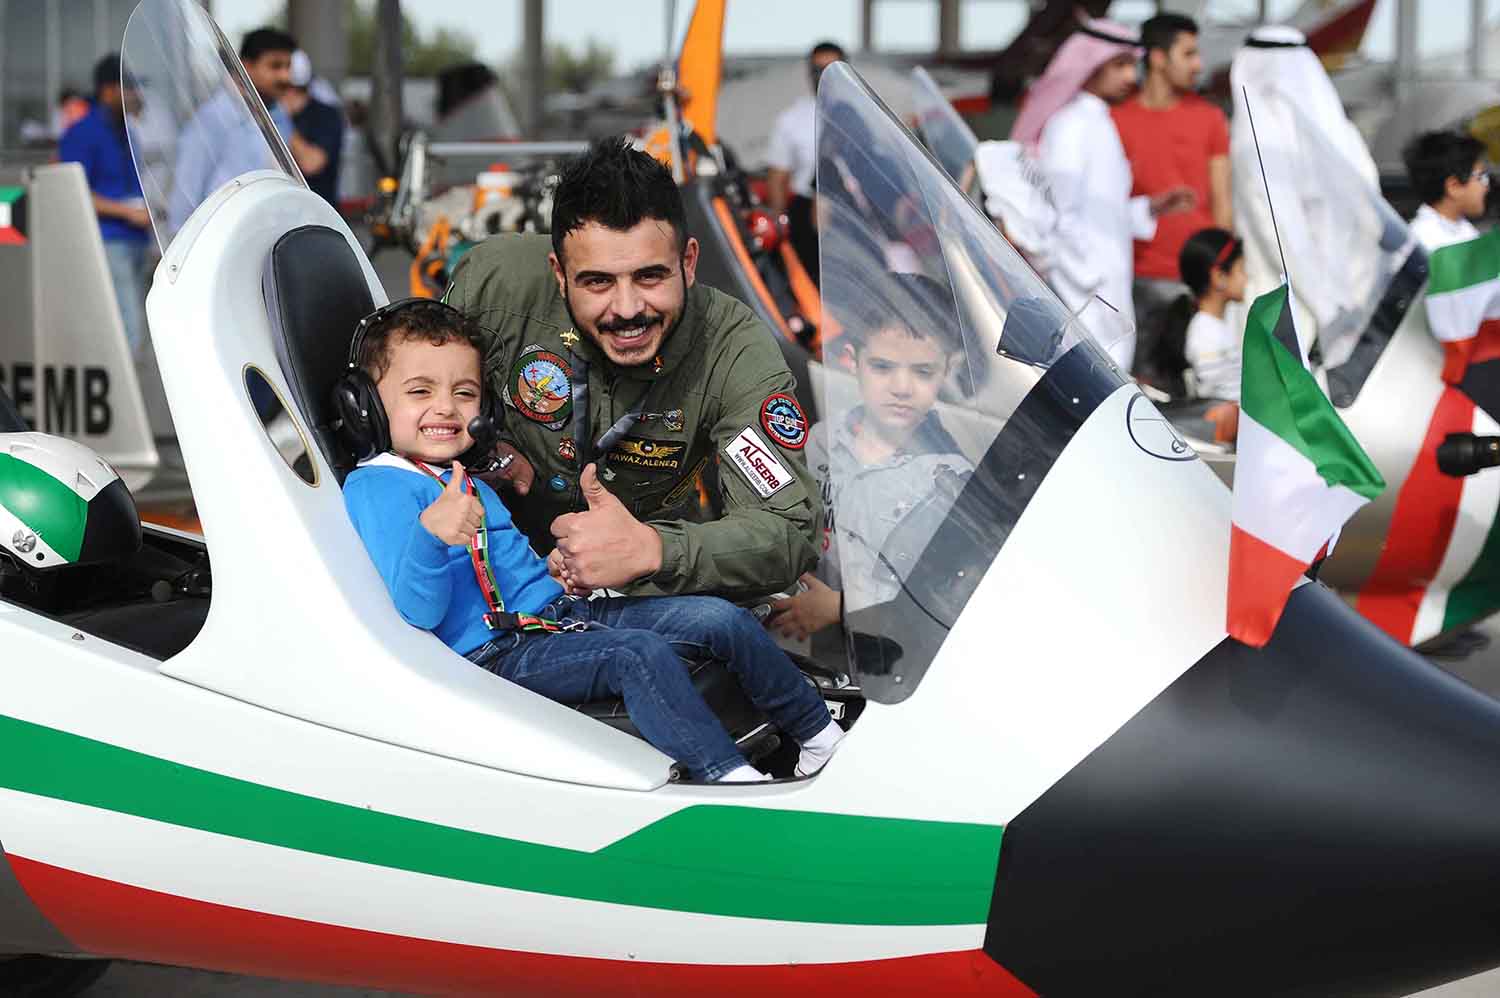 Activities of the Kuwait Frist Flying Gathering event